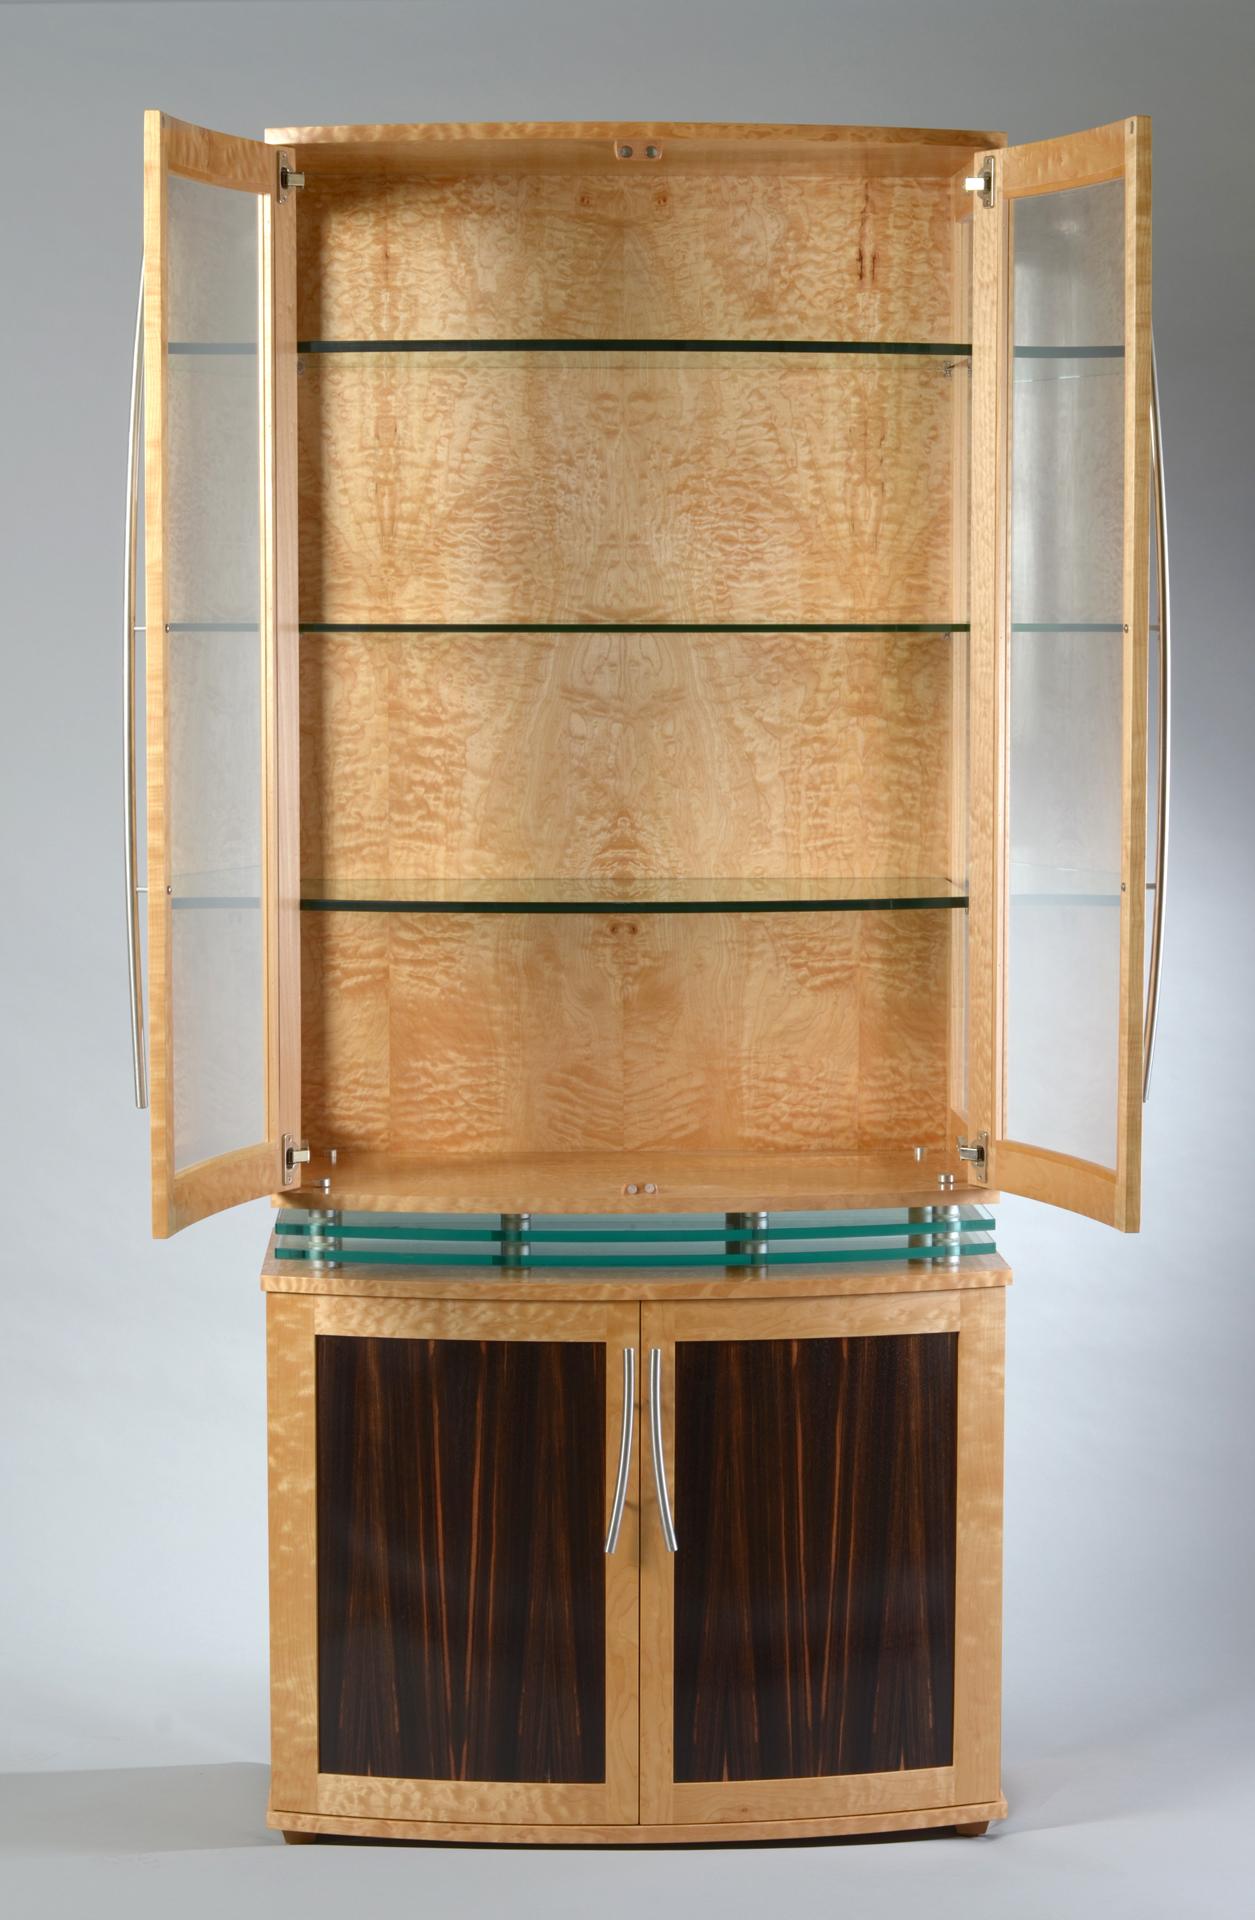 The “Levitating” Cabinet is a dramatic, art-deco style vitrine that is made by hand in Bloomington, Indiana.  Featuring a dramatic combination of the finest quilted maple and macassar ebony, every detail of this cabinet is designed and crafted to